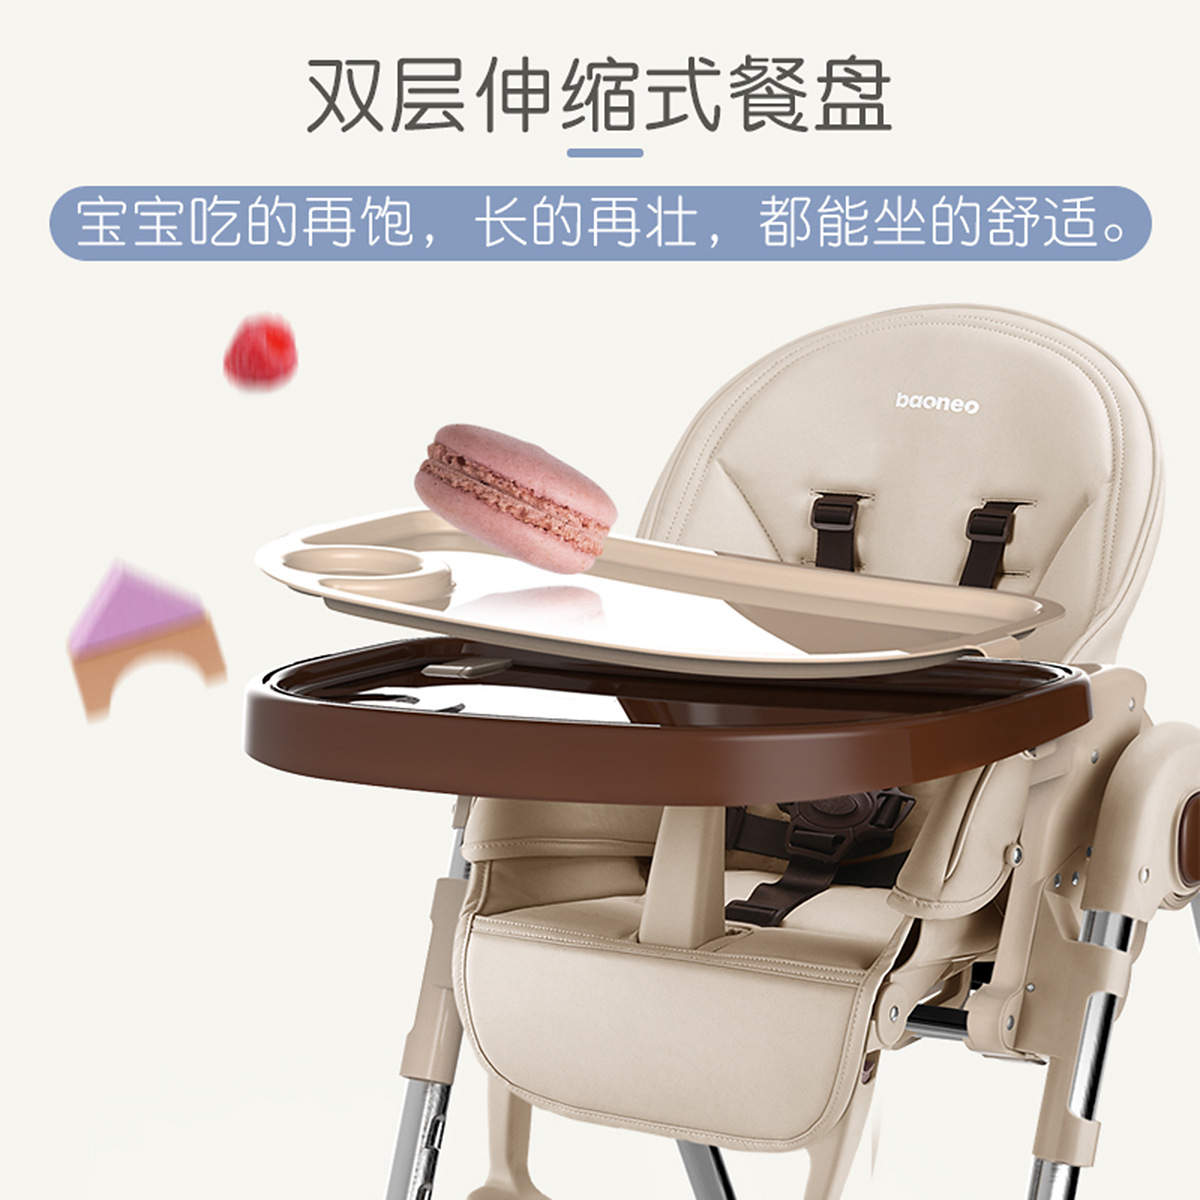 Russian free shipping authentic portable baby seat baby dinner table multifunction adjustable folding chairs for children